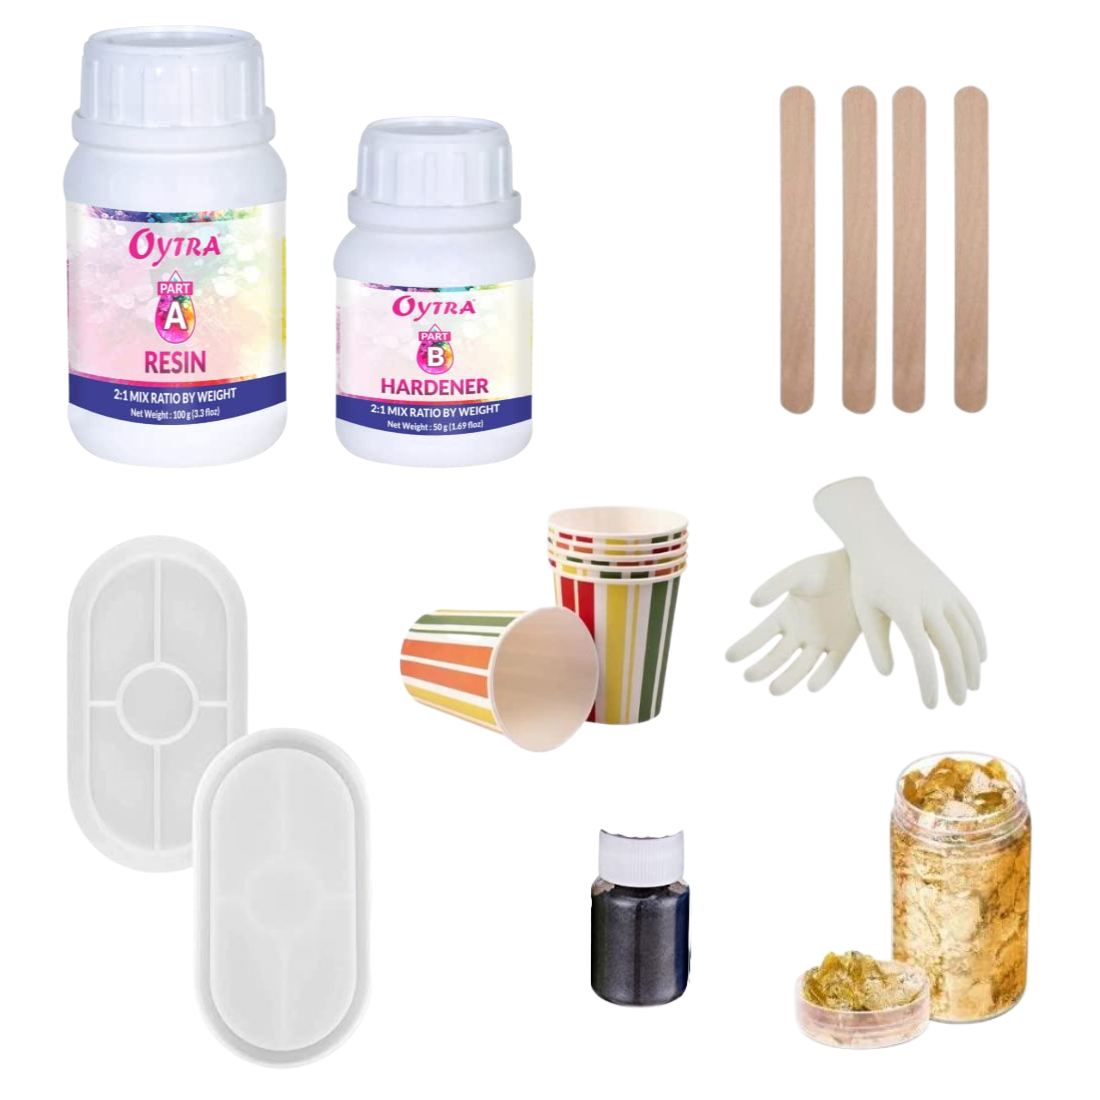 Resin Art kit For beginners, Diy resin Floral Tray, Oytra